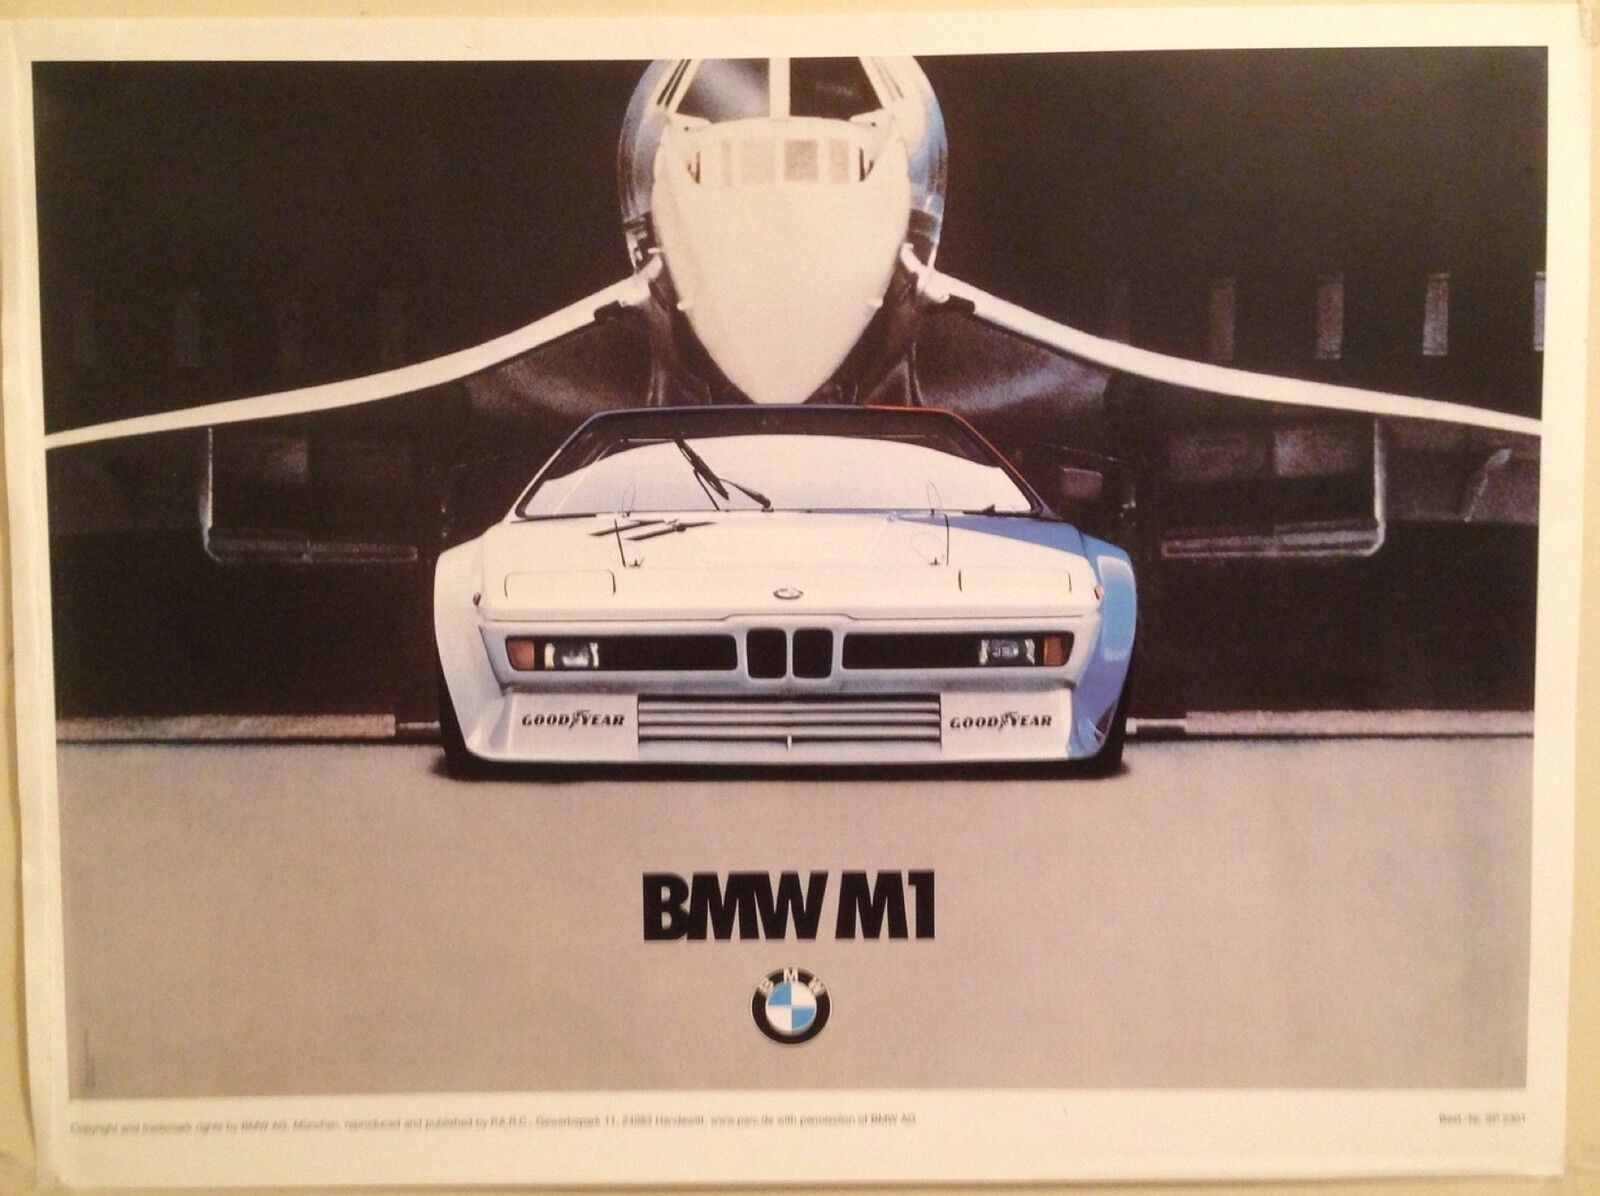 BMW M1- Concorde - Authorized Reprint Rare Car Poster Stunning Own It 😎